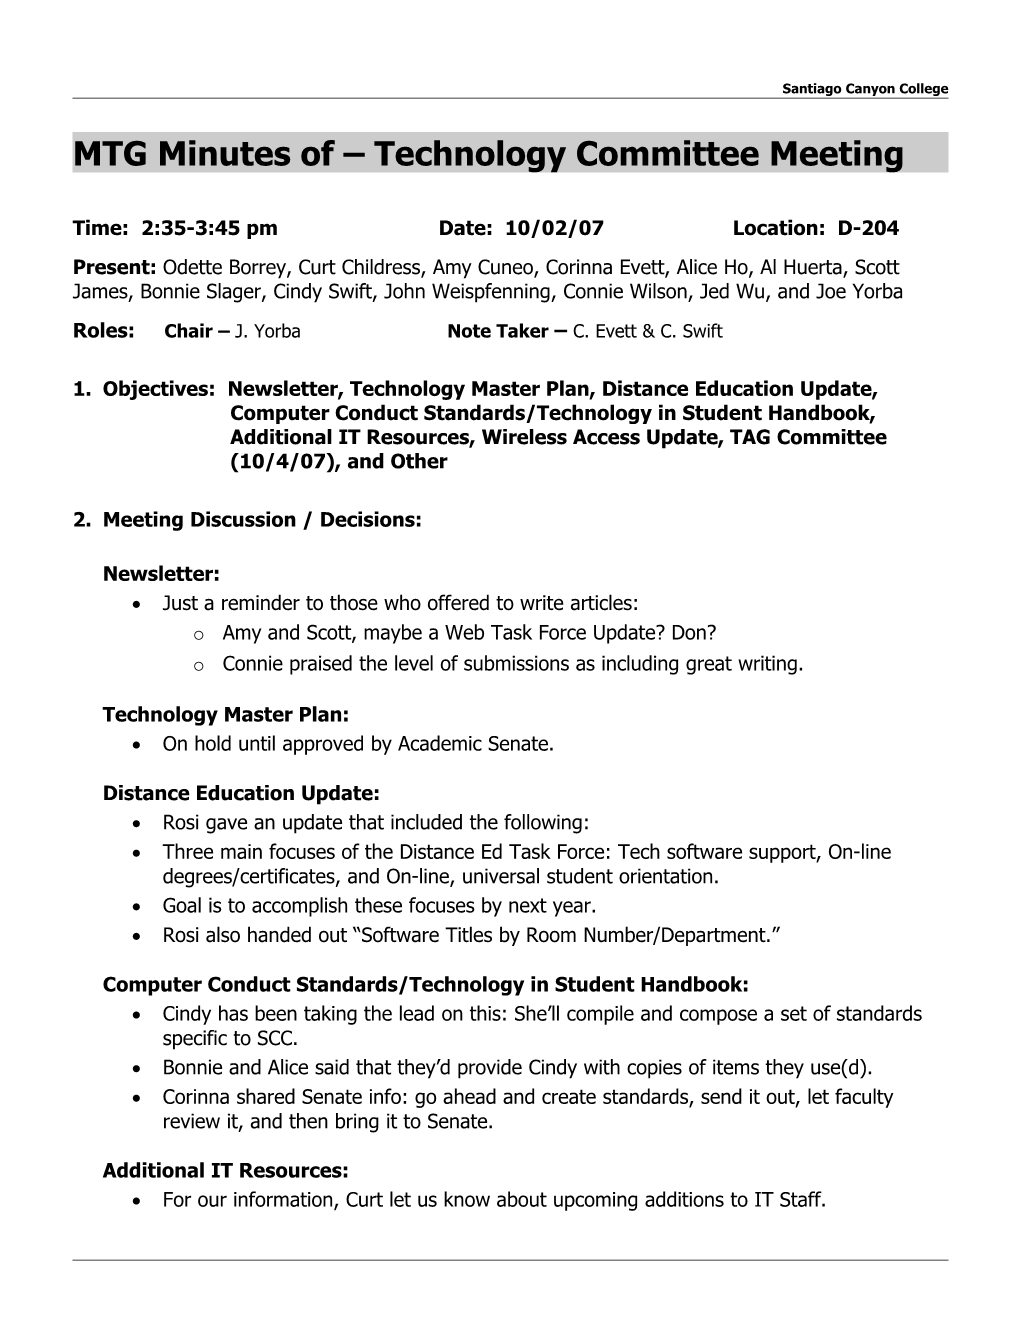 MTG Minutes of Technology Committee Meeting